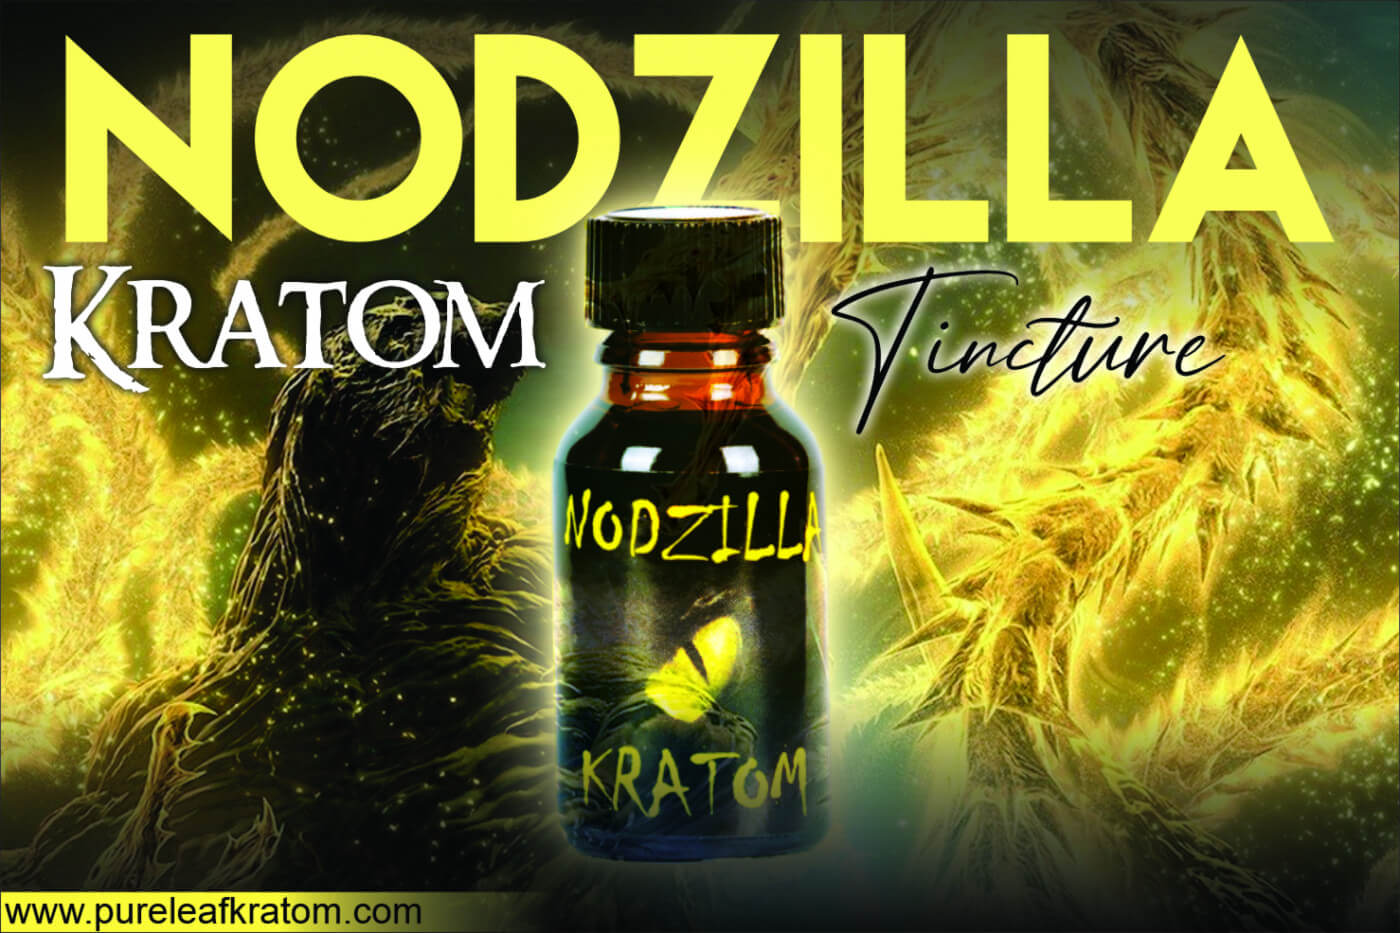 Nodzilla Kratom Tincture: This One is Worth Taking Your Attention